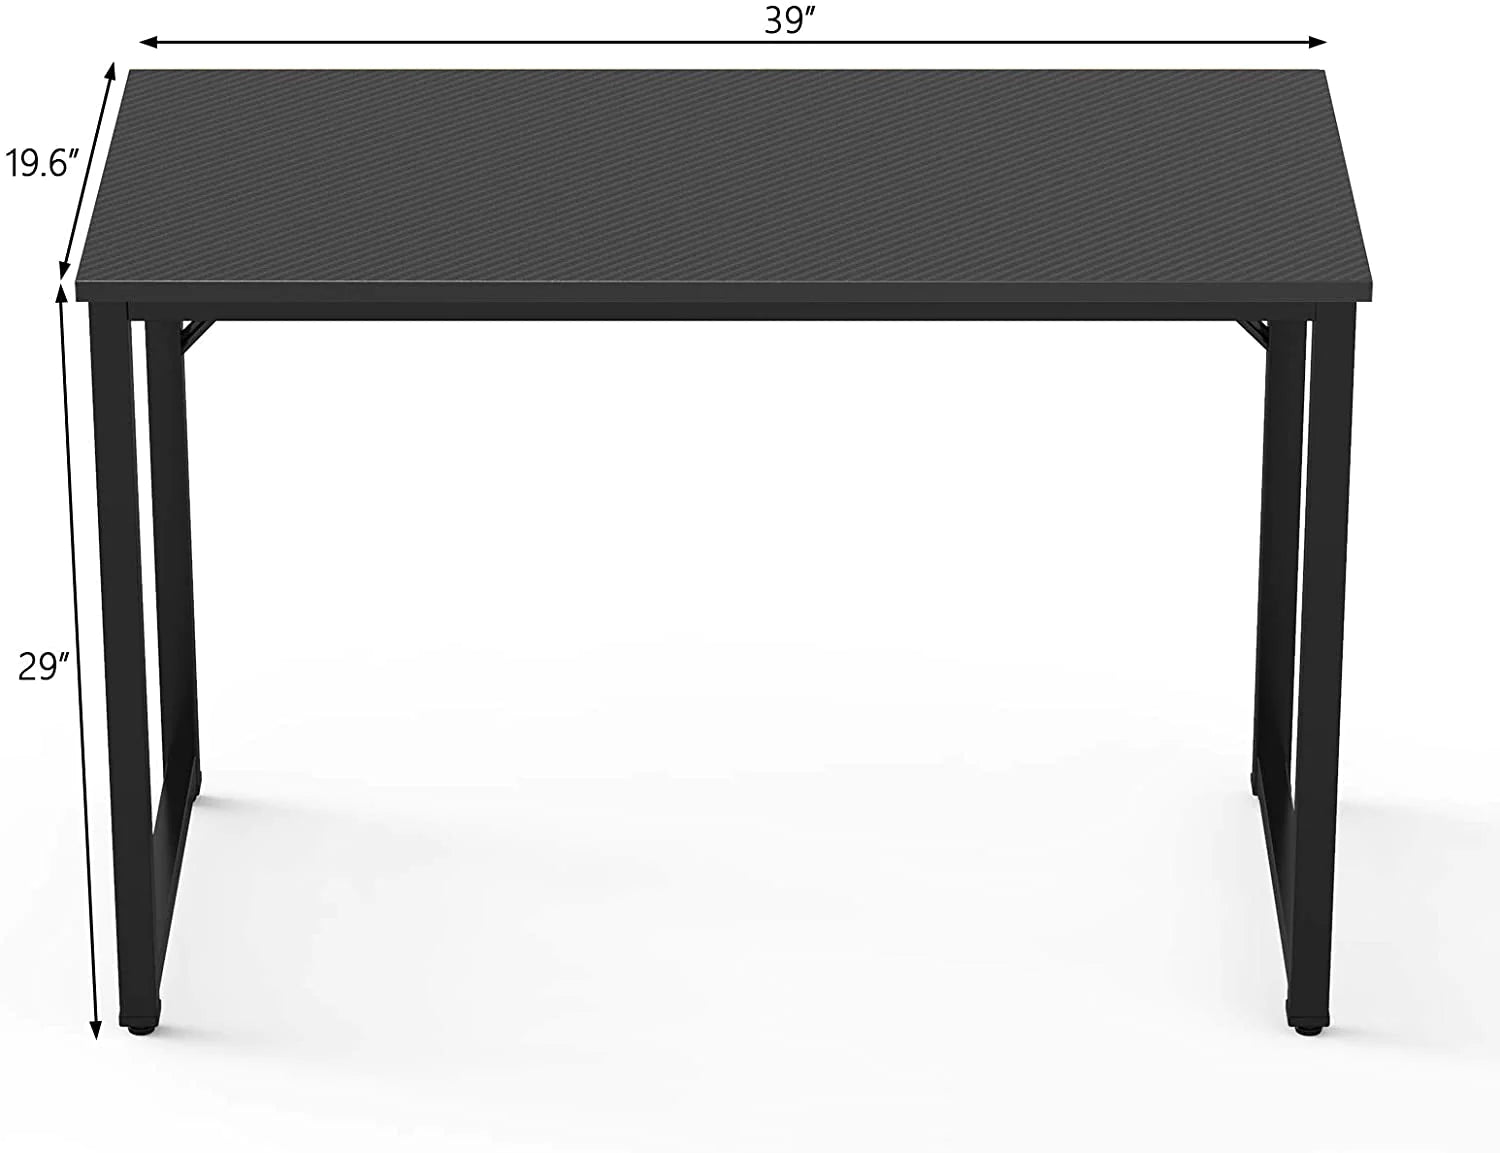 Study Table : Modern Simple Style PC Desk, Black Metal Frame Small Place